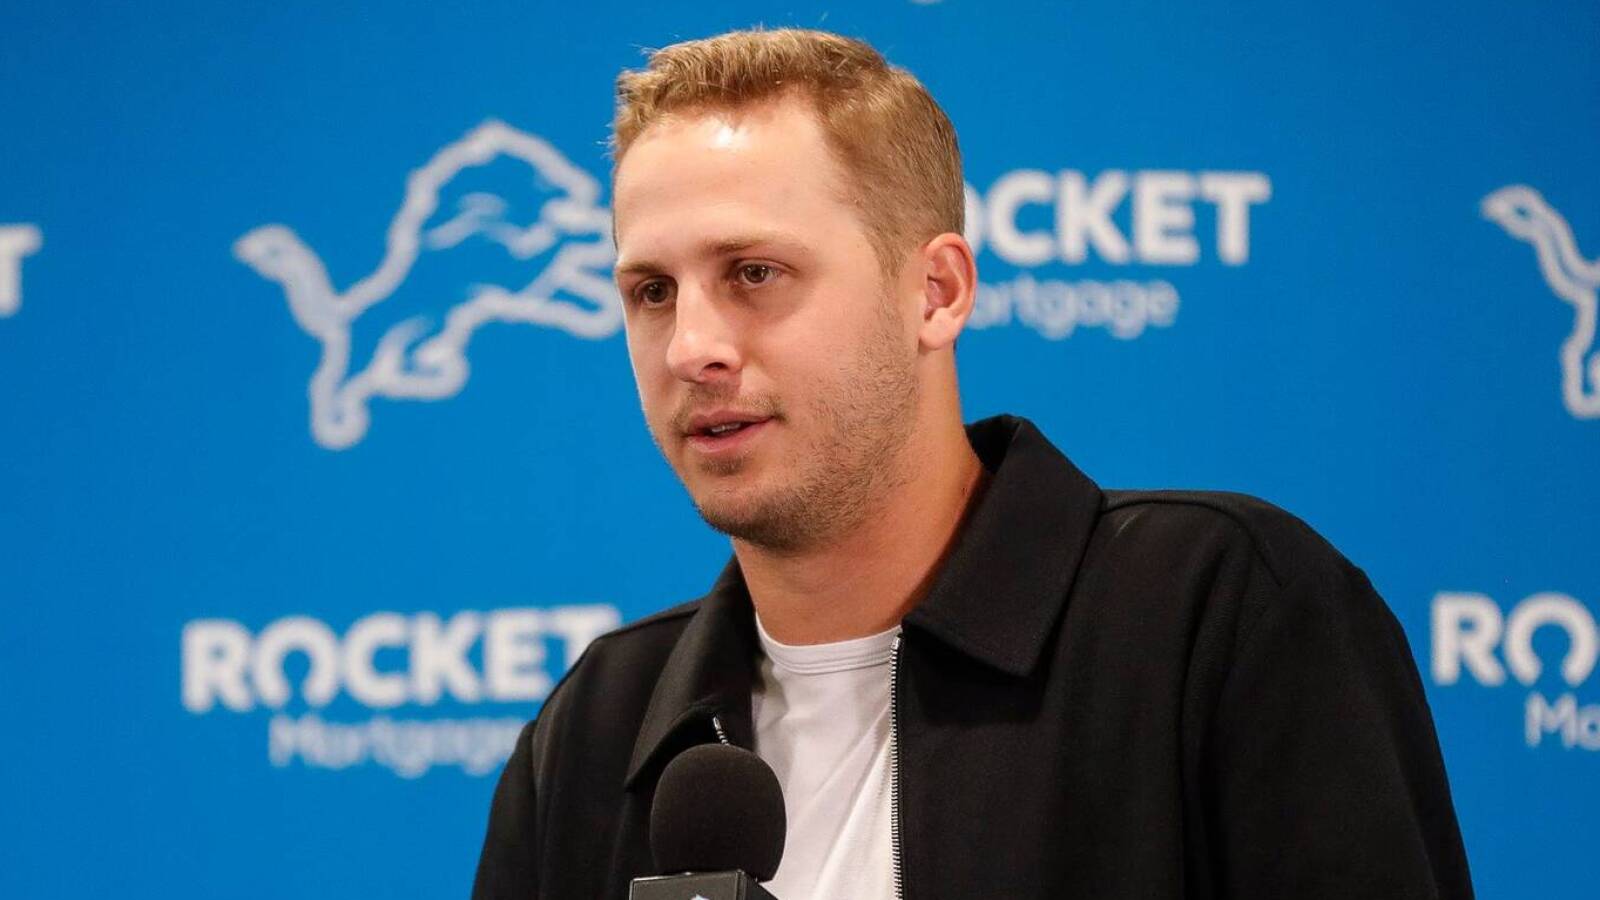 Lions' Jared Goff shares why now was right time to sign extension